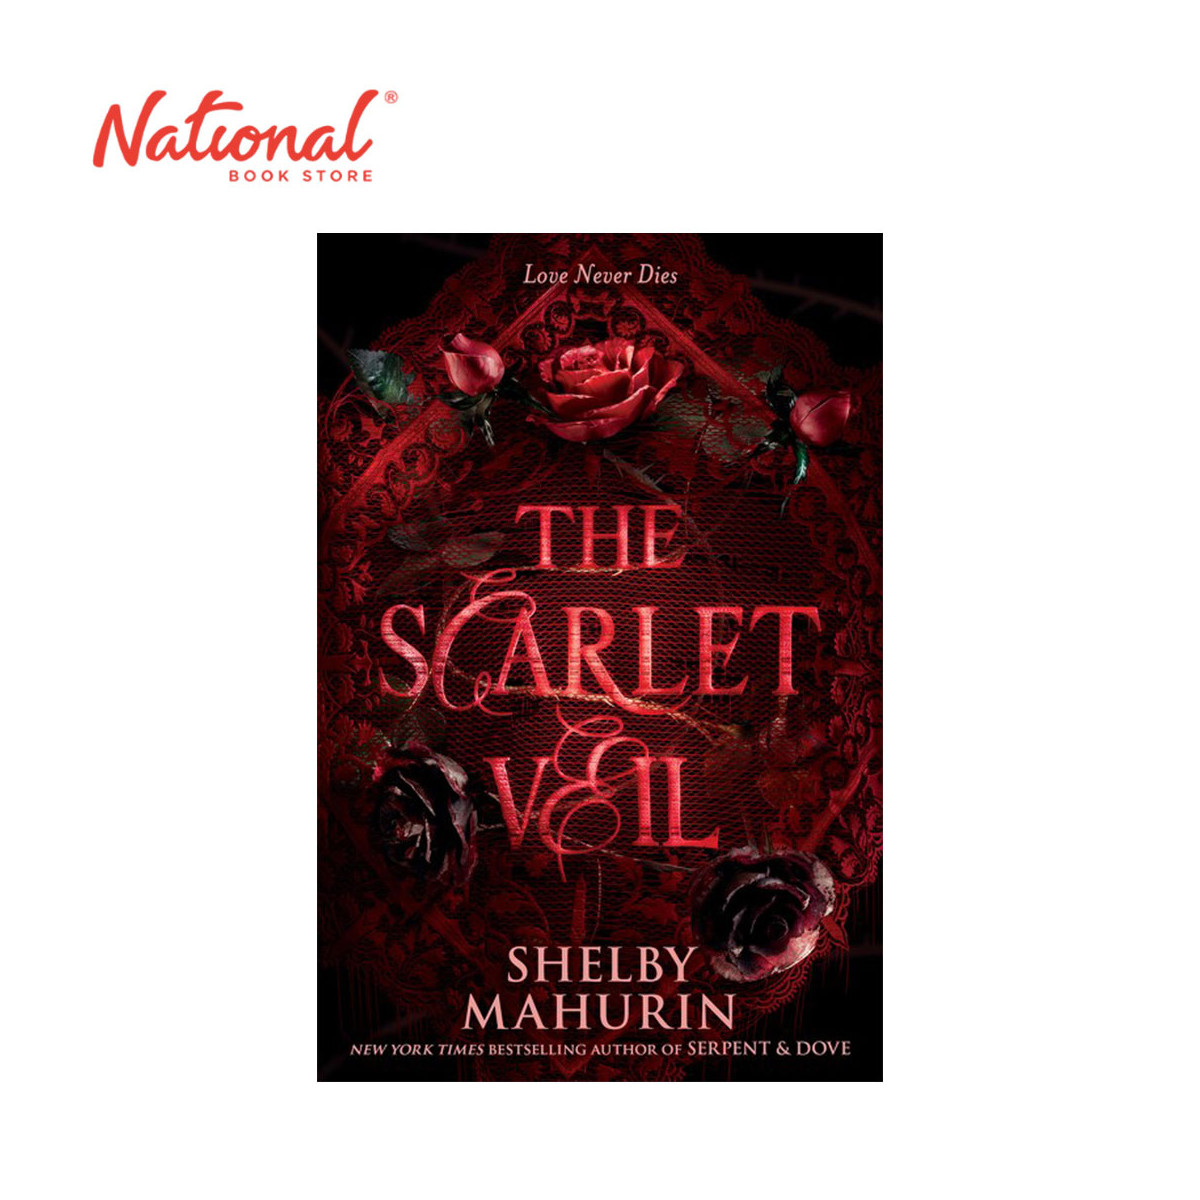 The Scarlet Veil by Shelby Mahurin - Trade Paperback - Teens Fiction